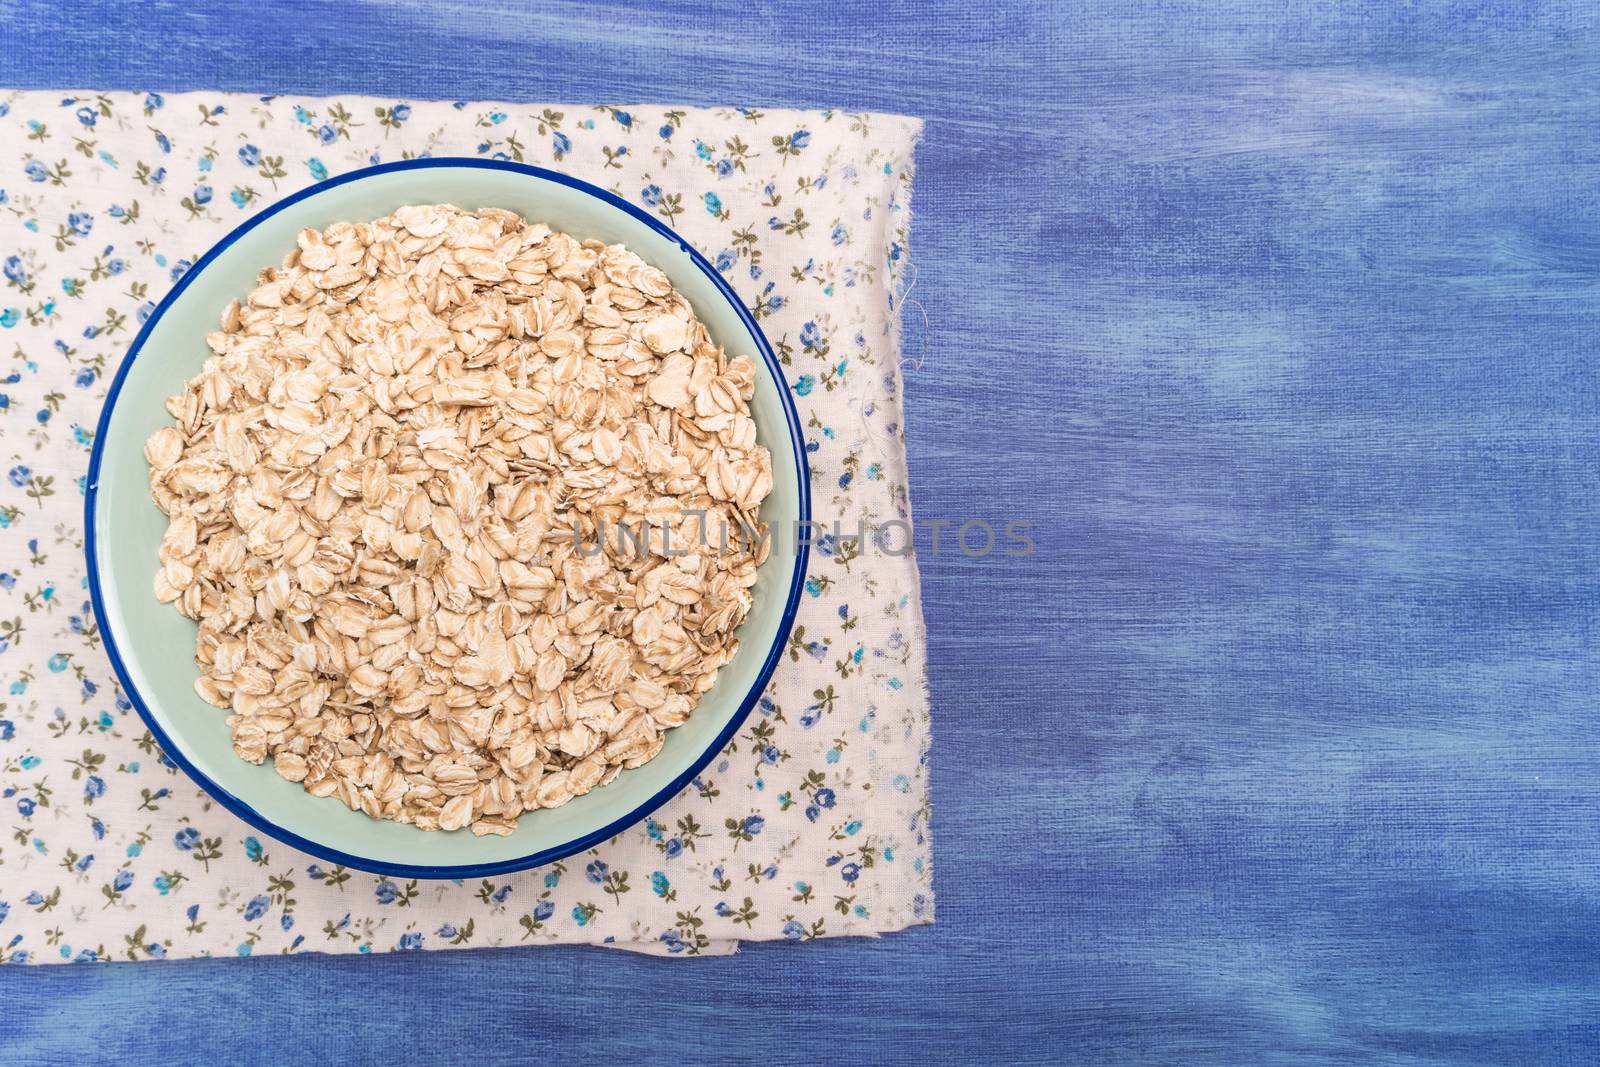 Oat flakes in a bowl on rustic textured background by AnaMarques